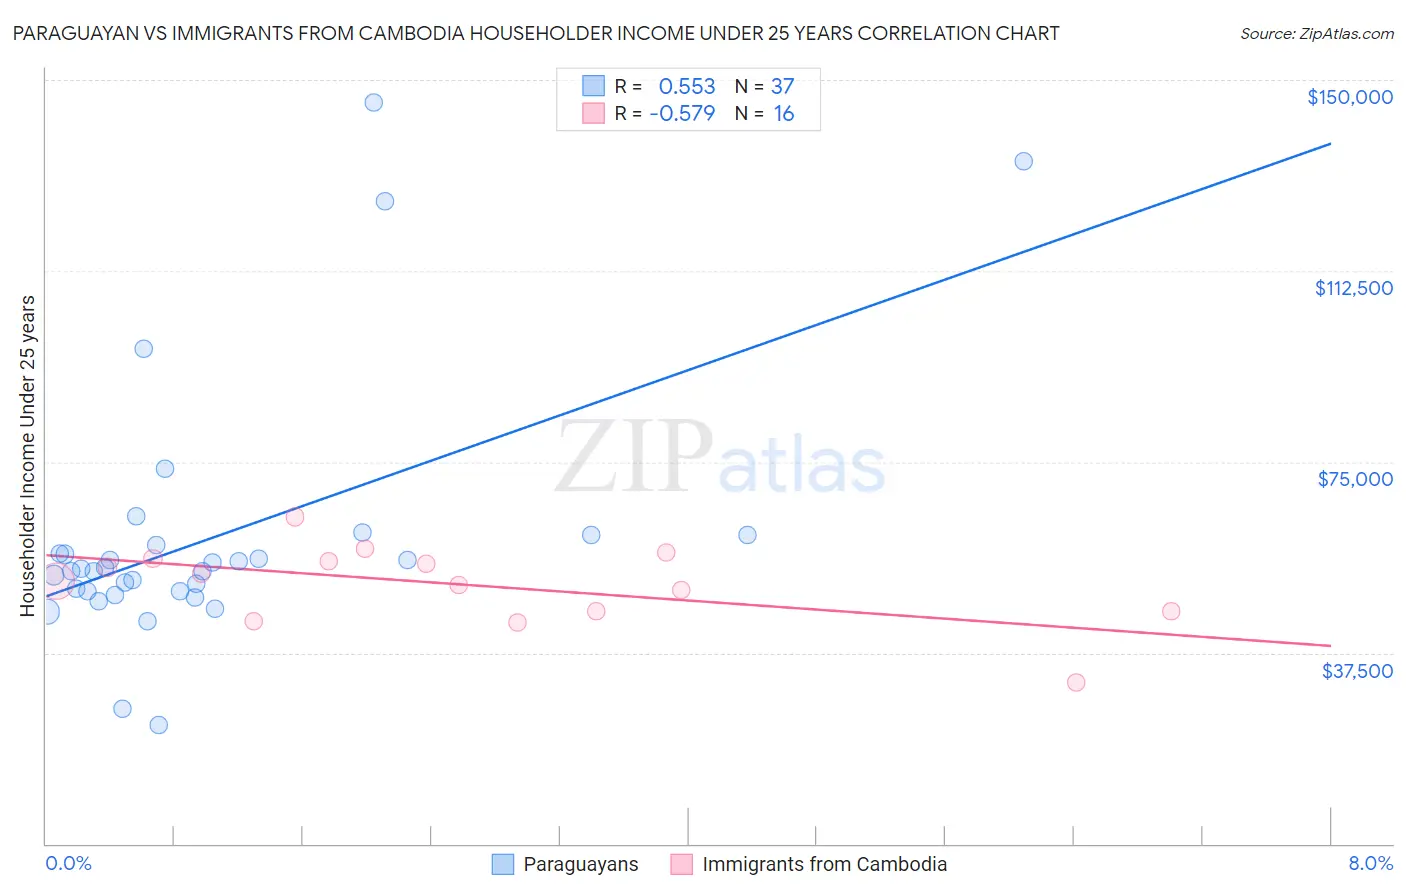 Paraguayan vs Immigrants from Cambodia Householder Income Under 25 years